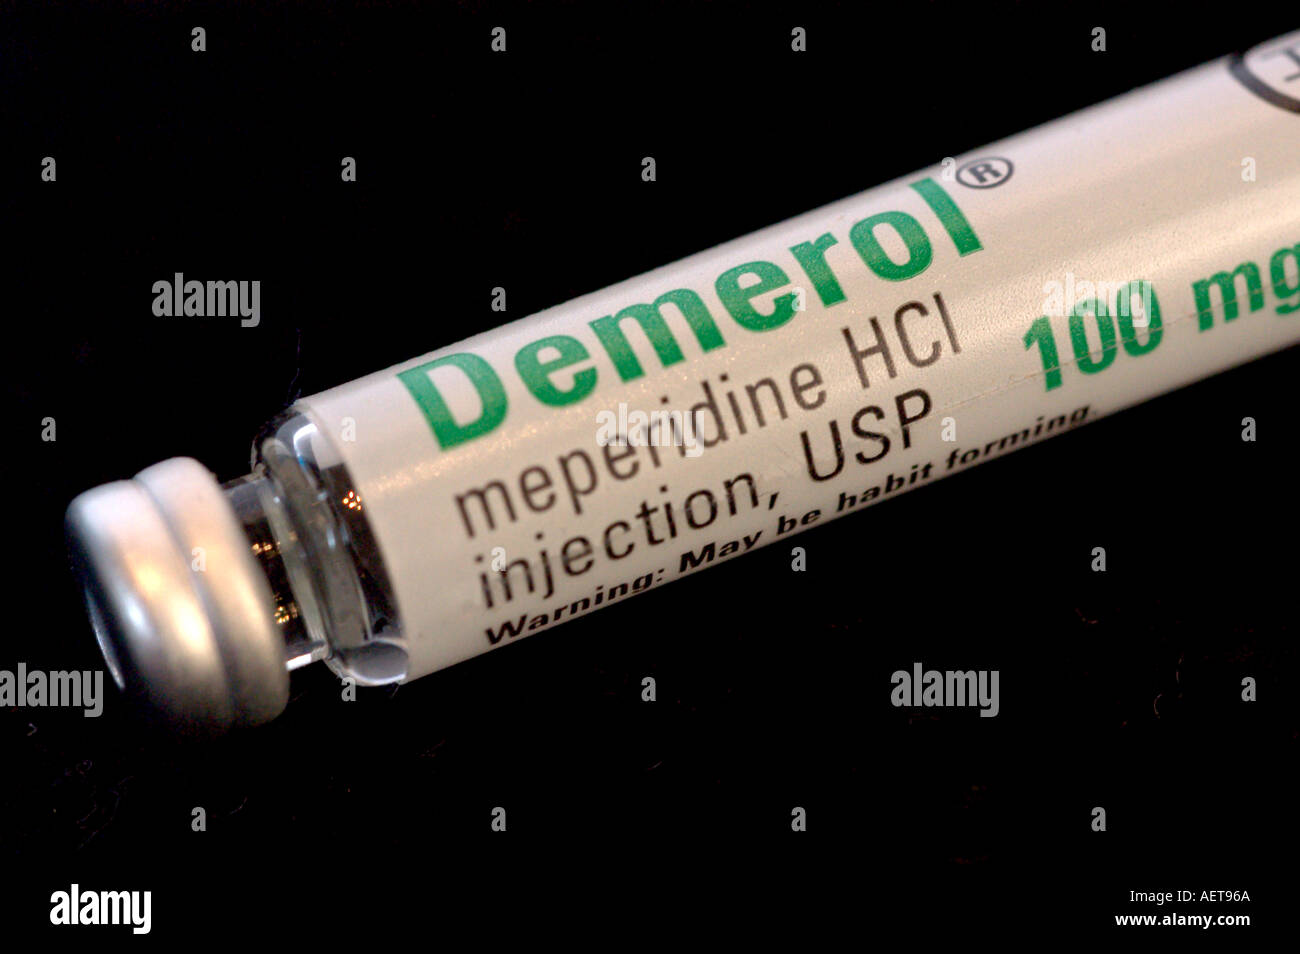 Pictures Of Demerol 33